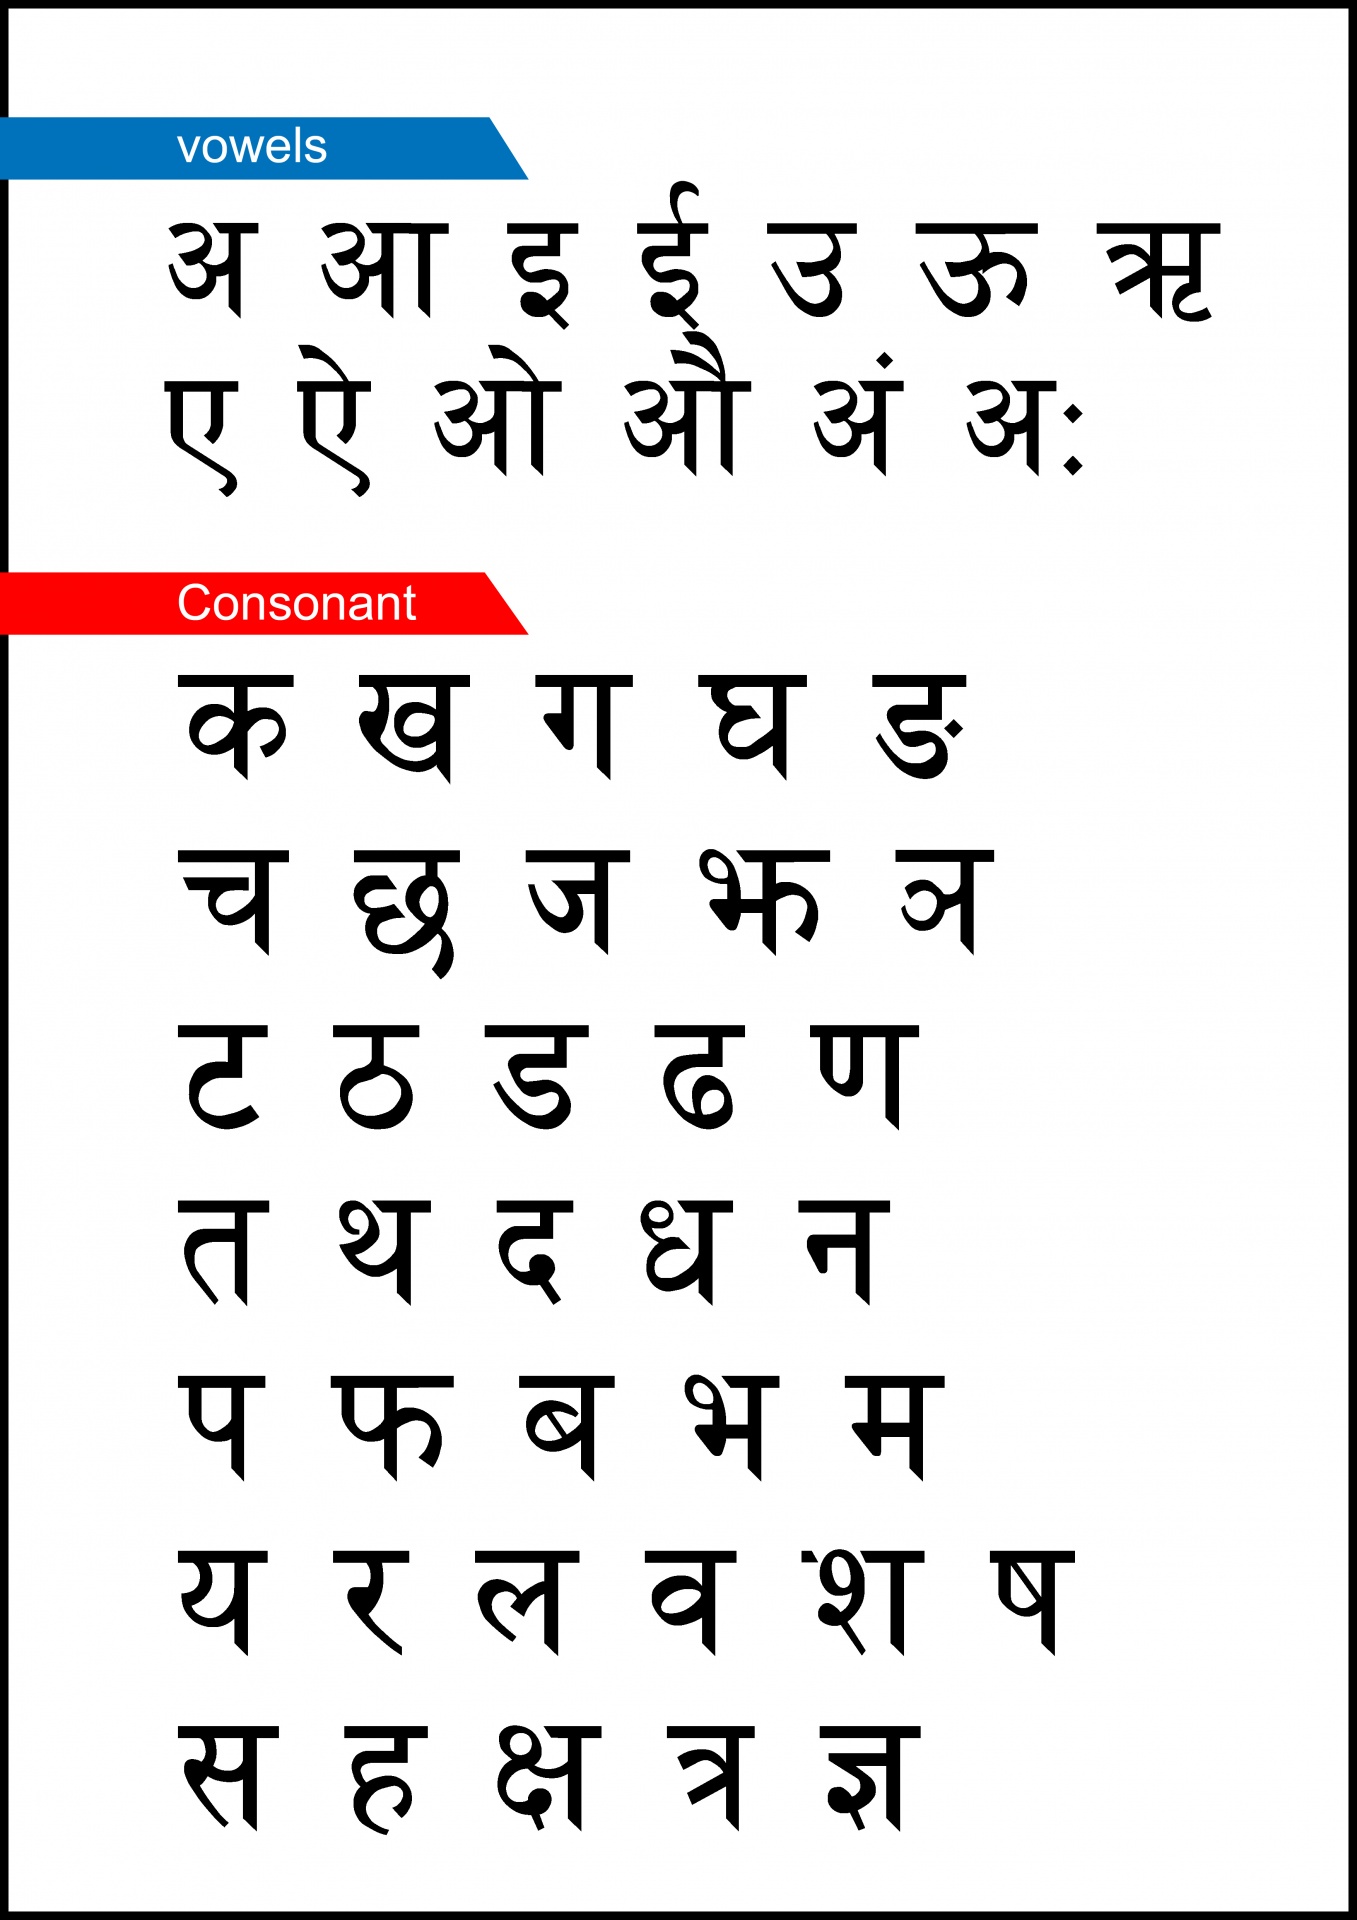 Drawing Pages Kids: 39+ Hindi Alphabet Chart Free Download Mistakes